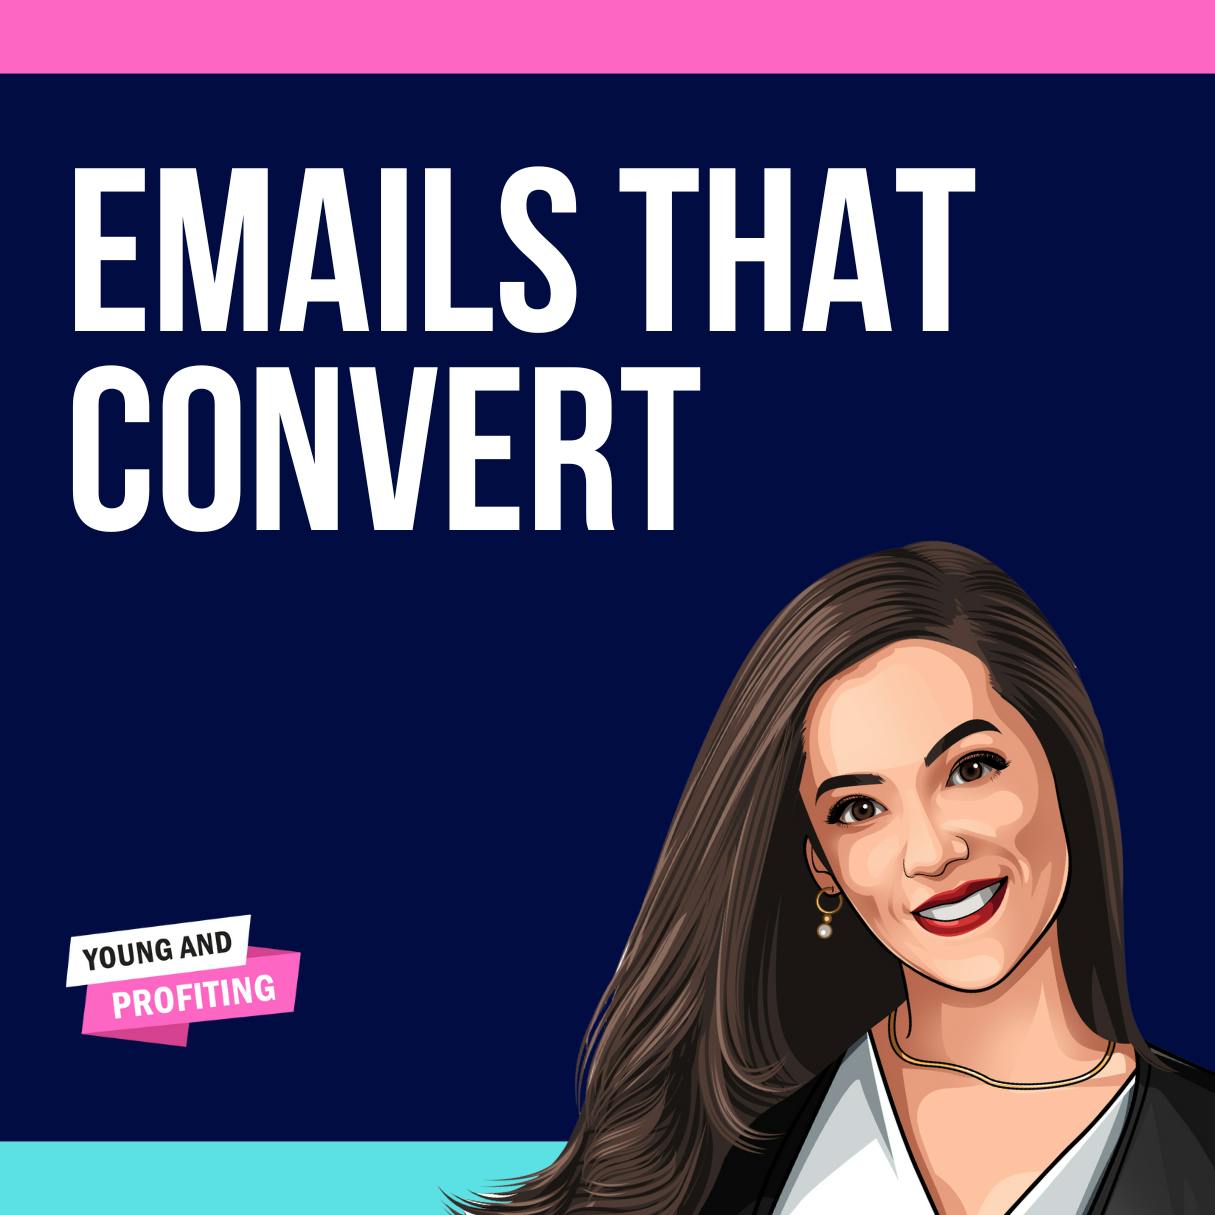 Generate Leads and Grow Your Business With These Email Marketing Secrets, Presented by Constant Contact by Hala Taha | YAP Media Network